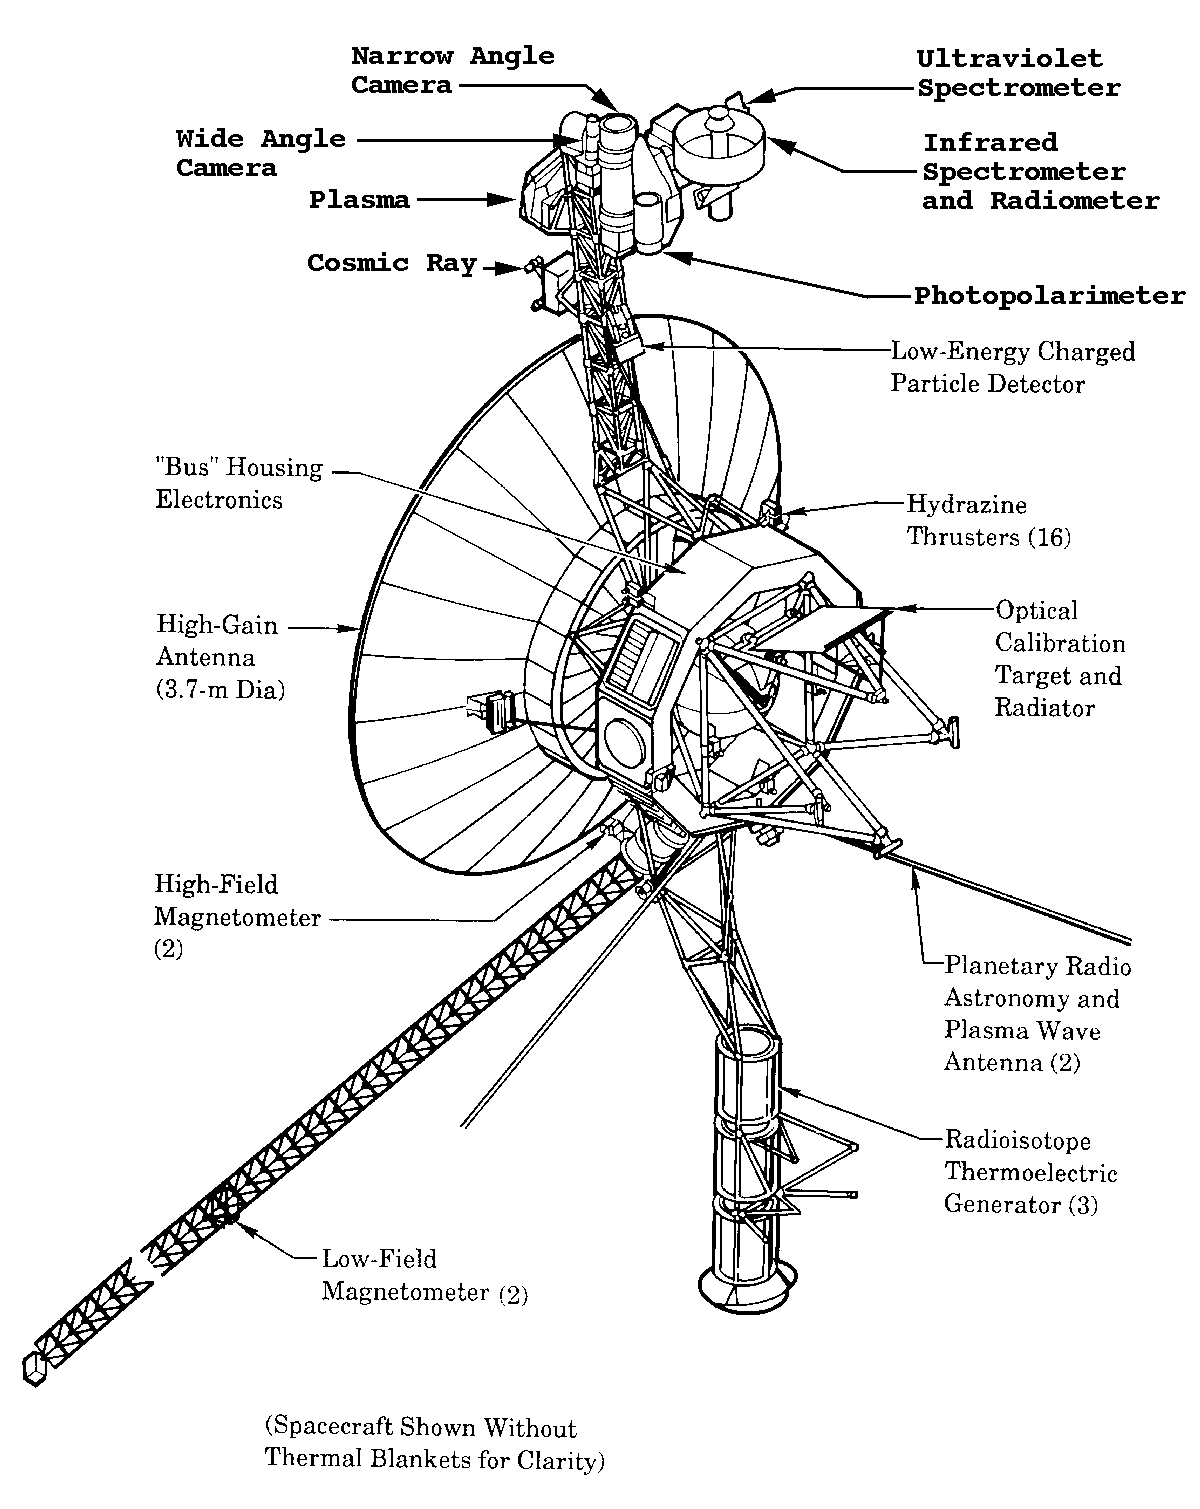 diagram of location of instruments on Voyager spacecraft